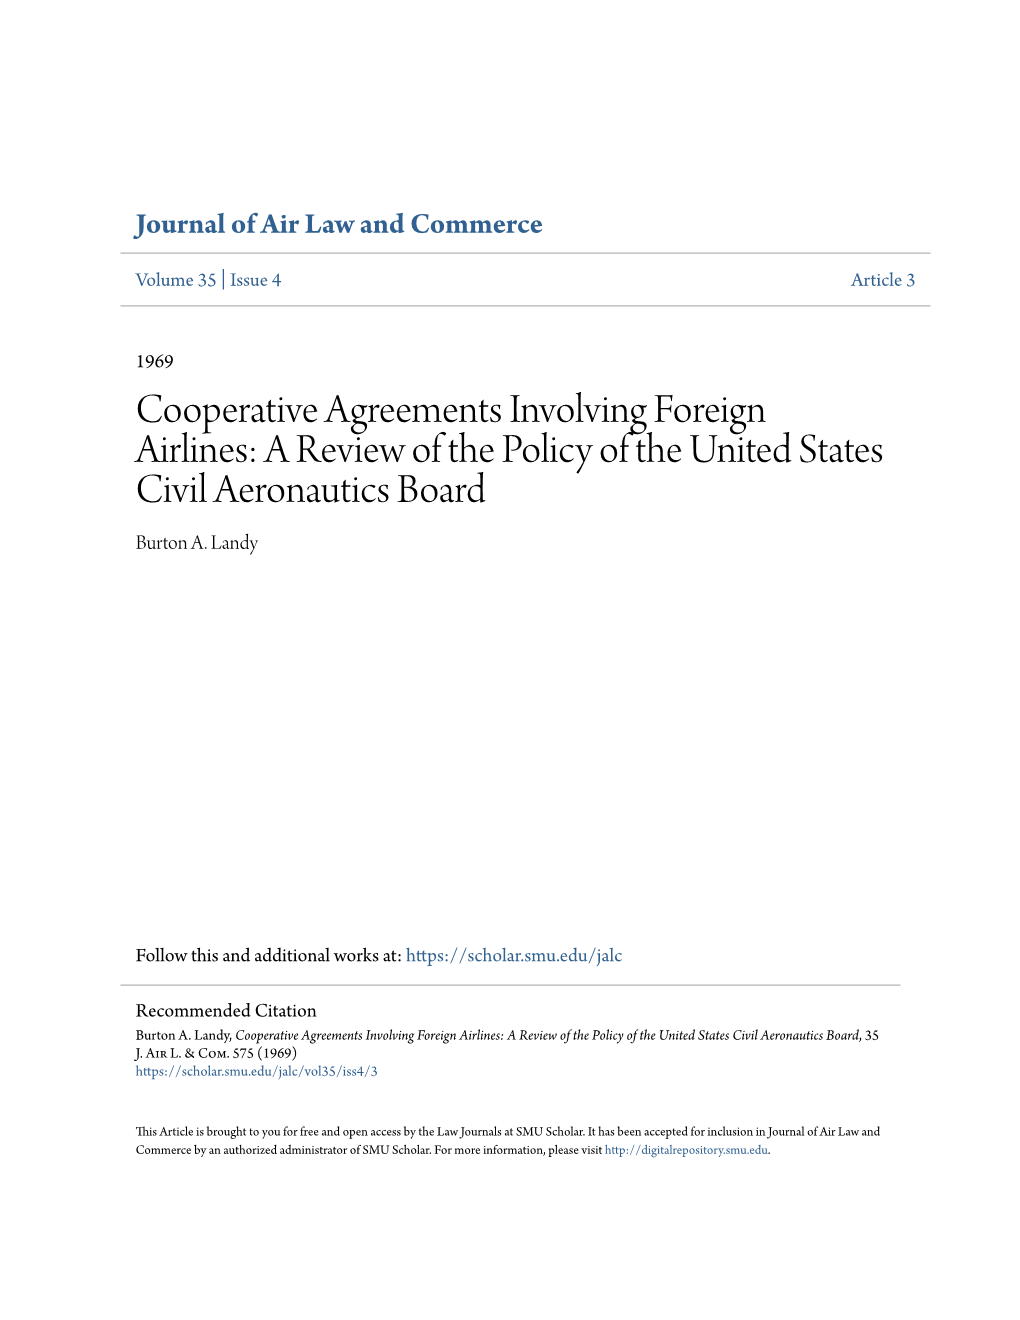 Cooperative Agreements Involving Foreign Airlines: a Review of the Policy of the United States Civil Aeronautics Board Burton A